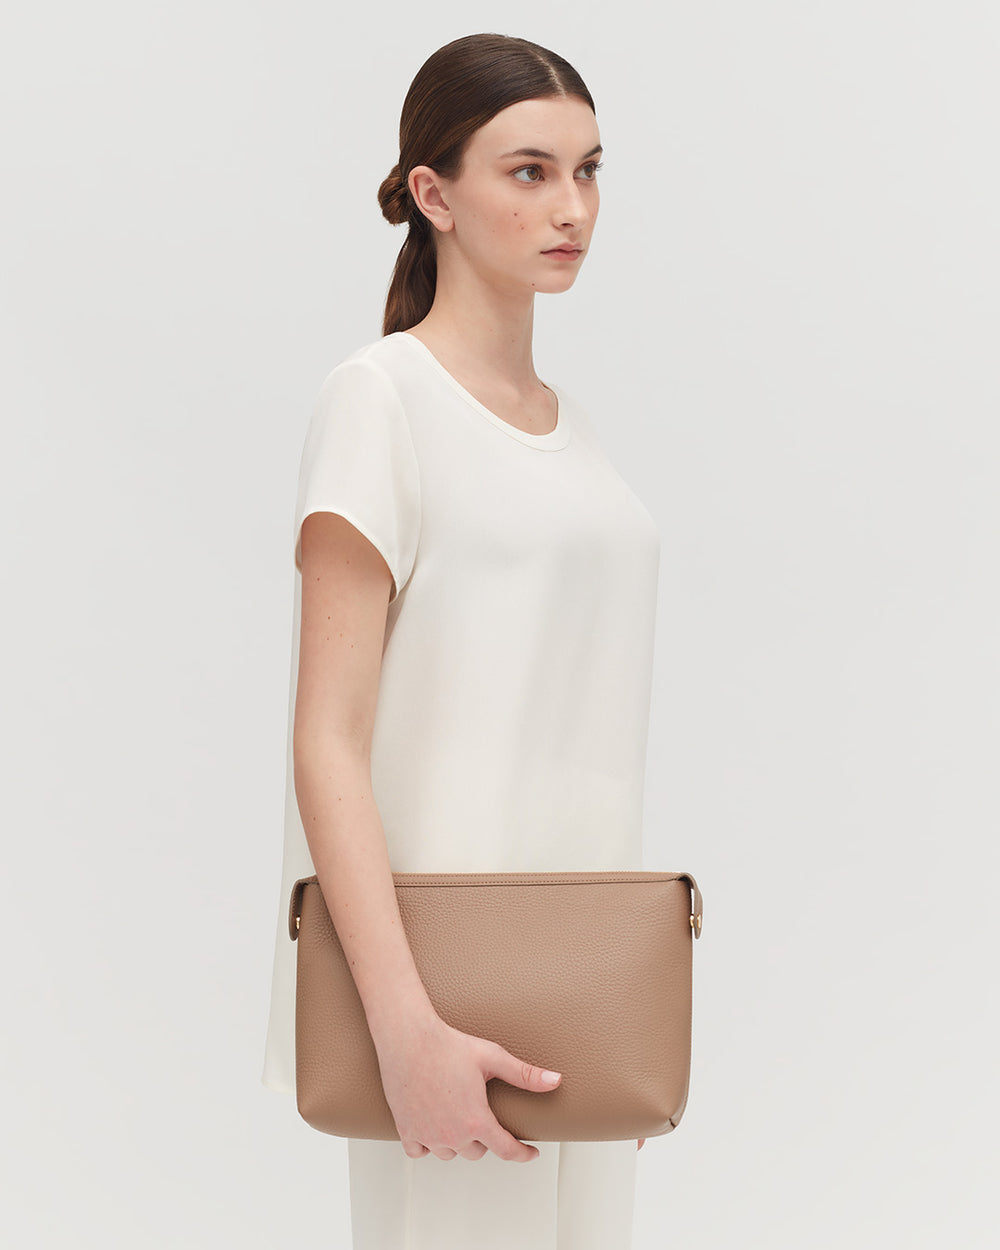 Woman standing with a handbag over her shoulder